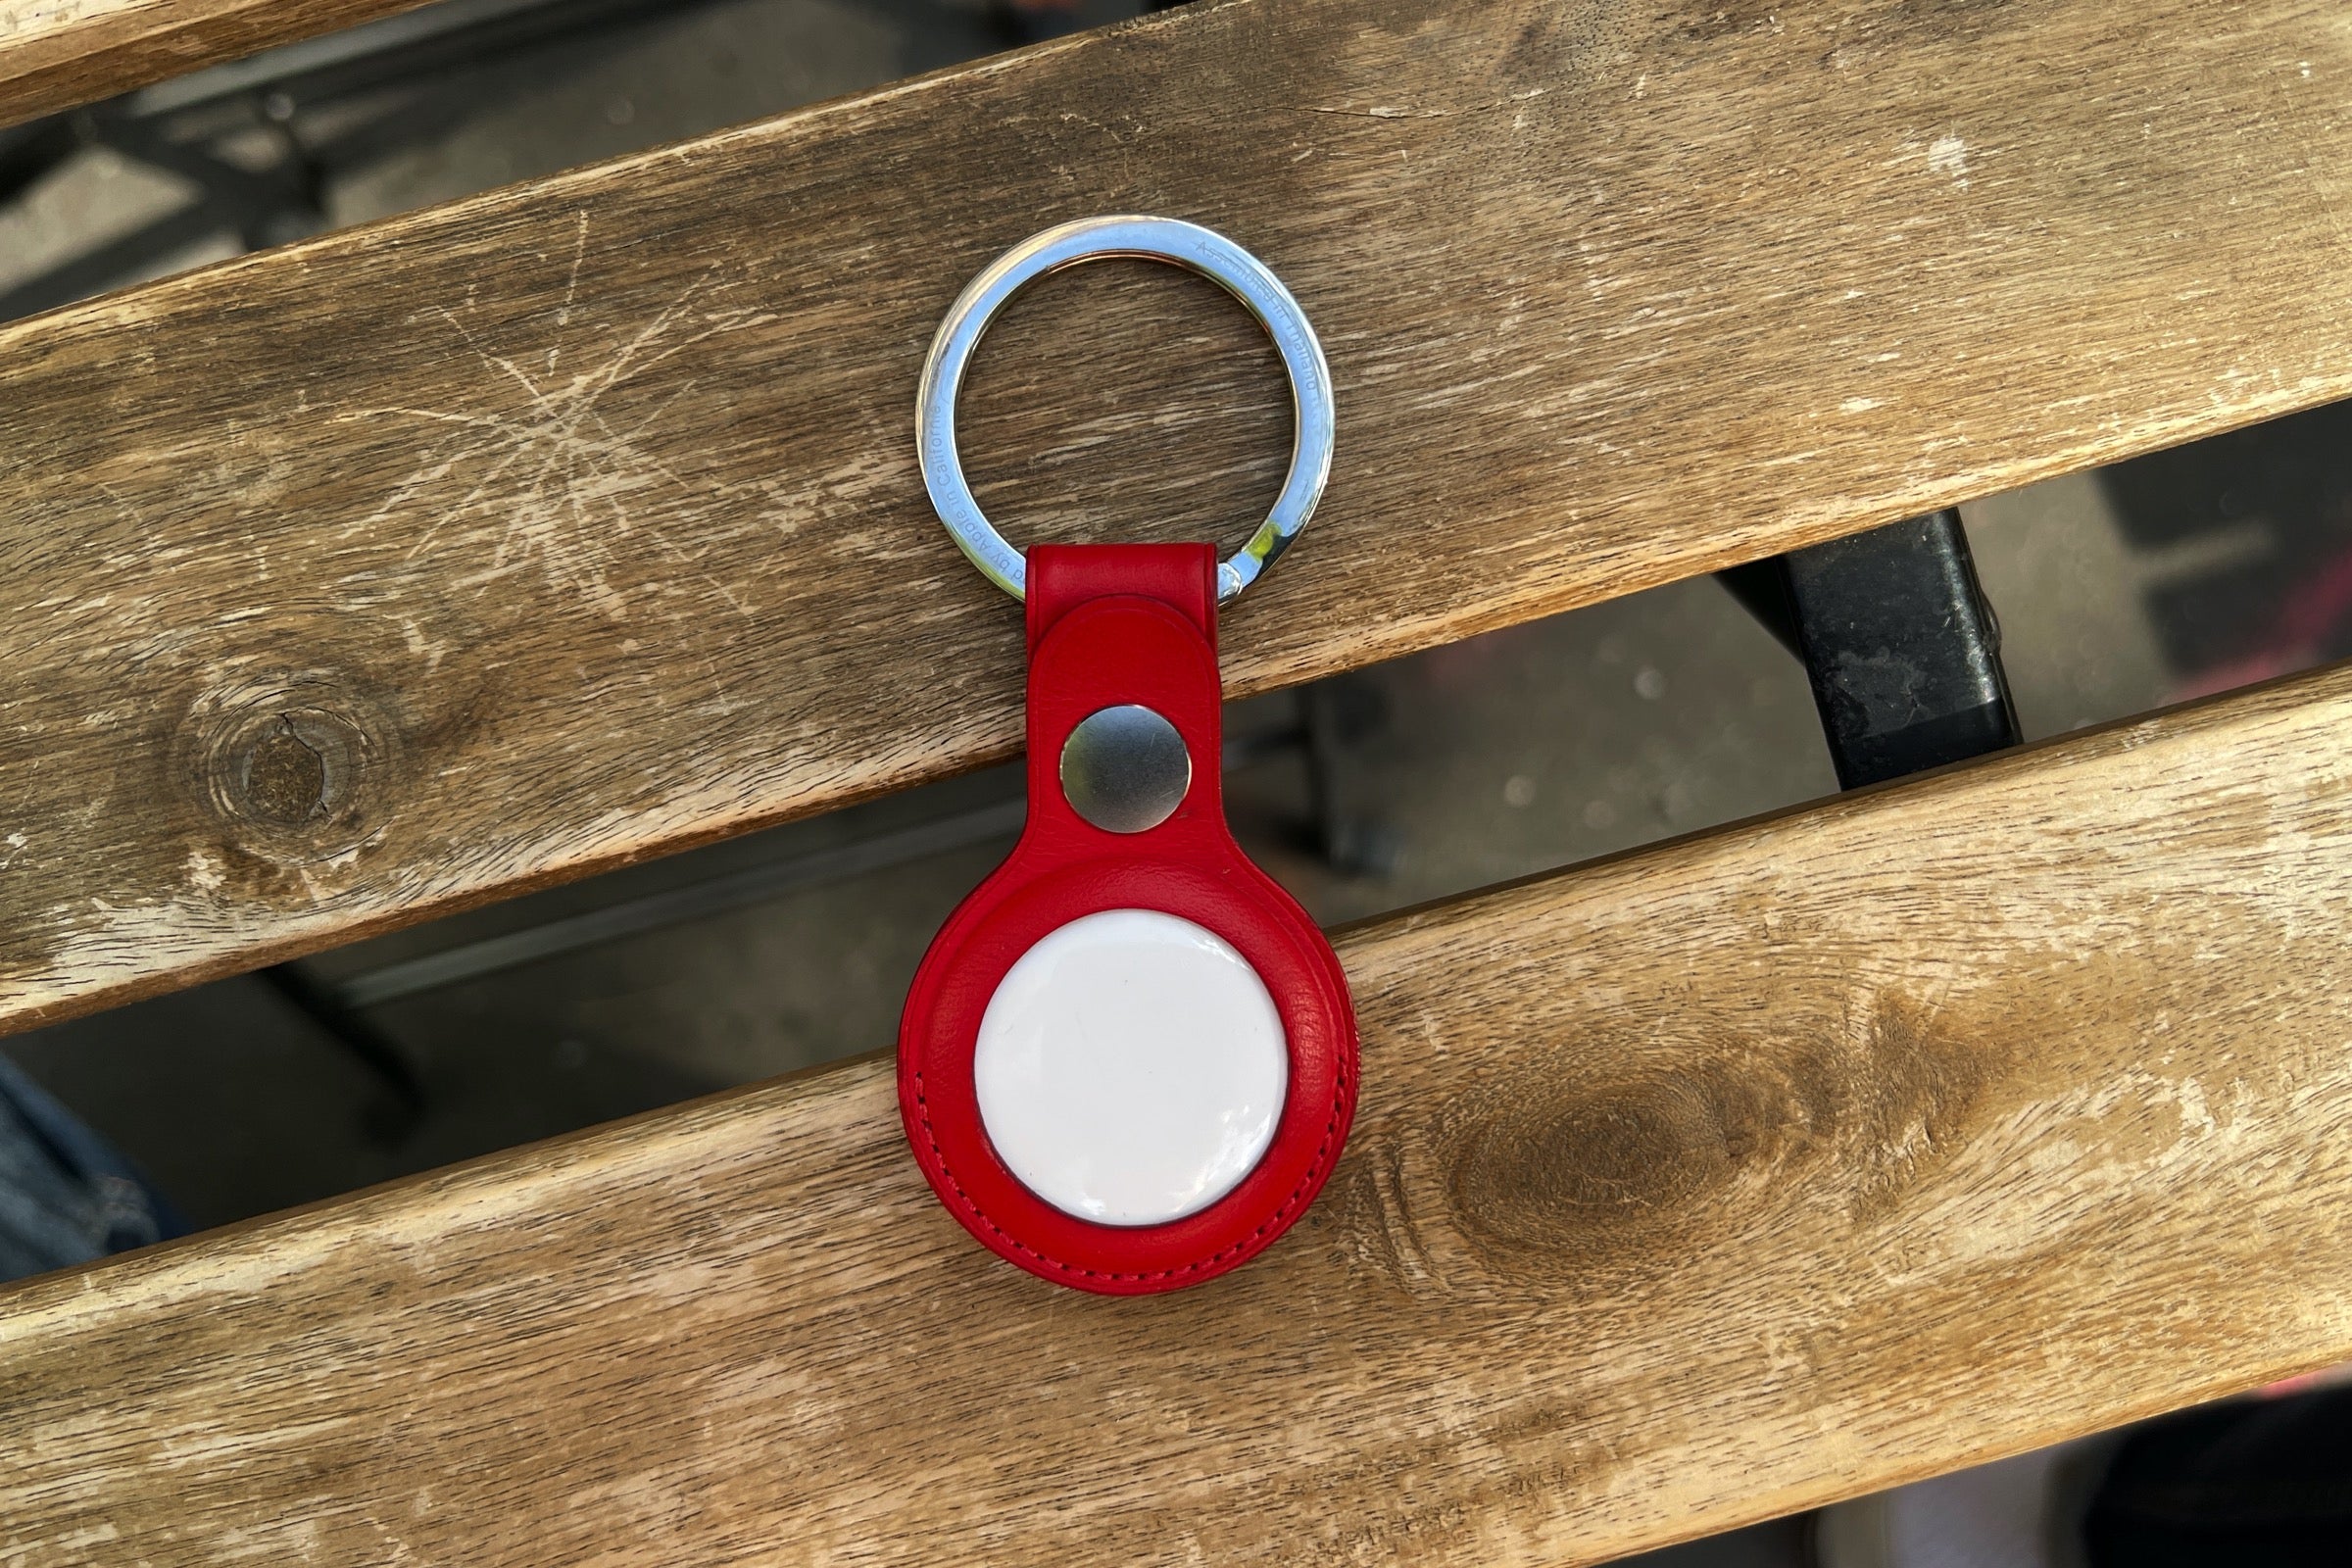 Best Apple AirTag accessories: Key chains, key rings and holders